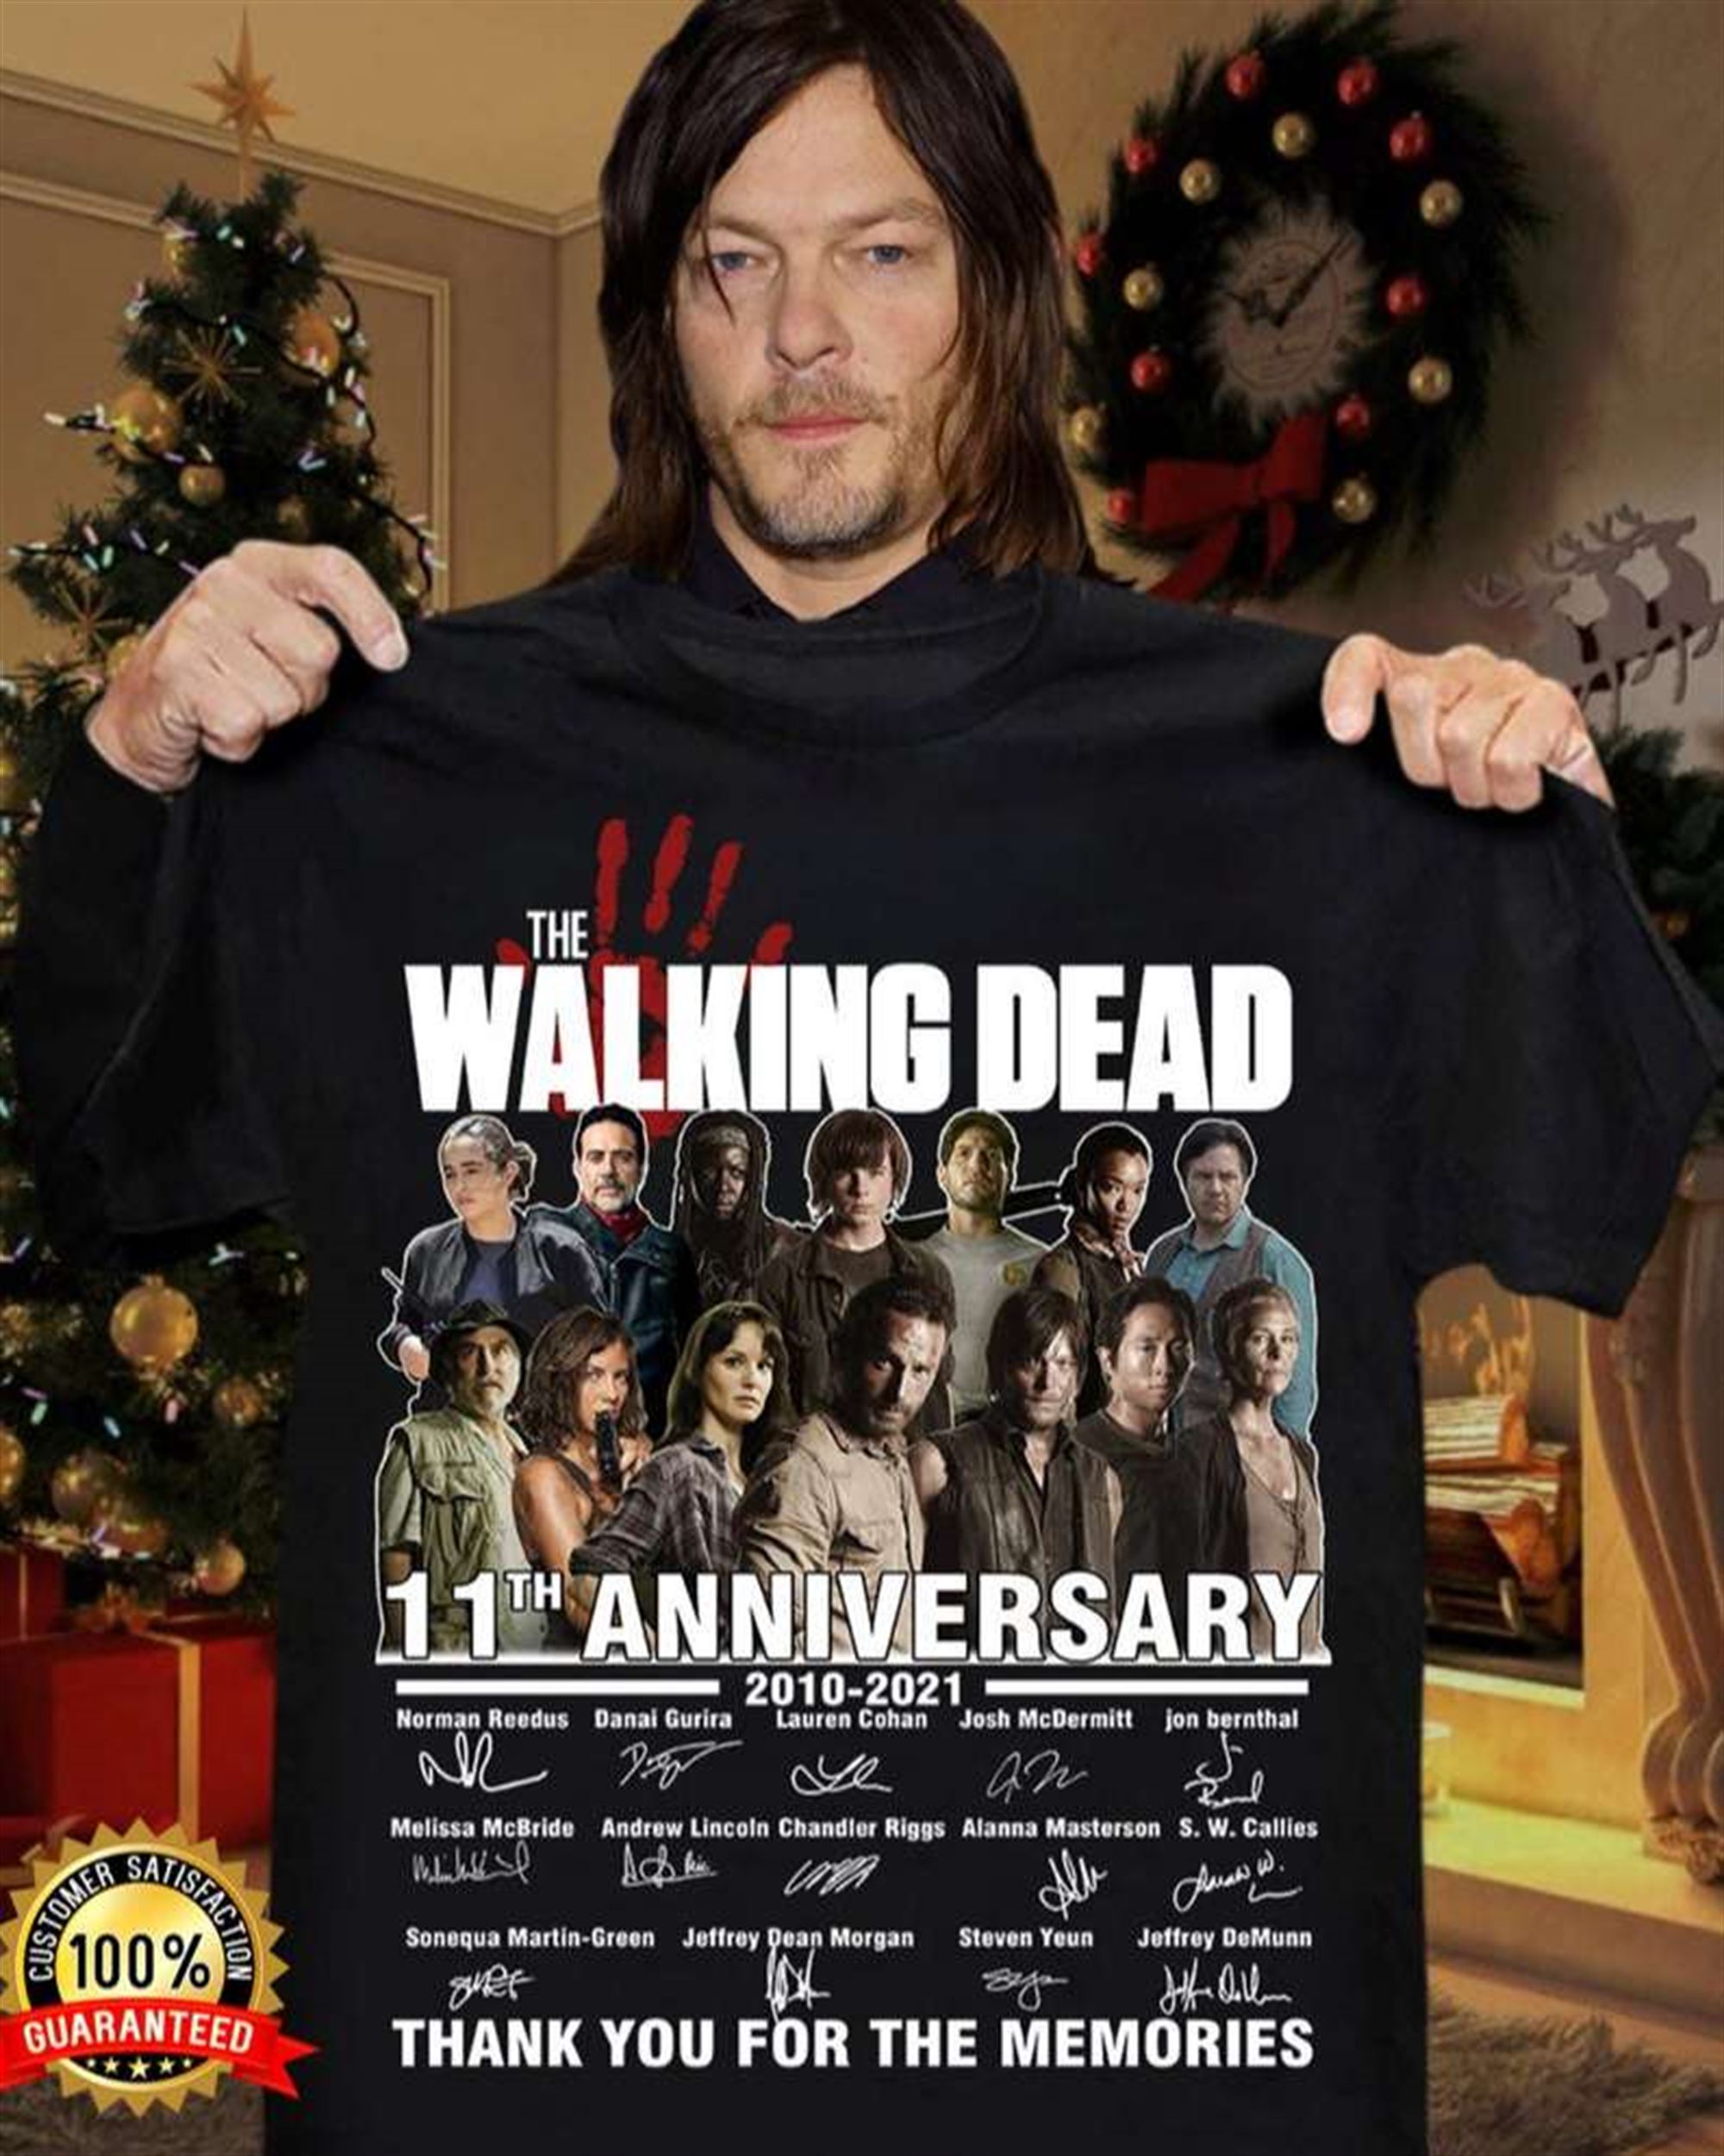 The Walking Dead 11th Anniversary 2010-2021 Thank You For The Memories T Shirt Full Size Up To 5xl